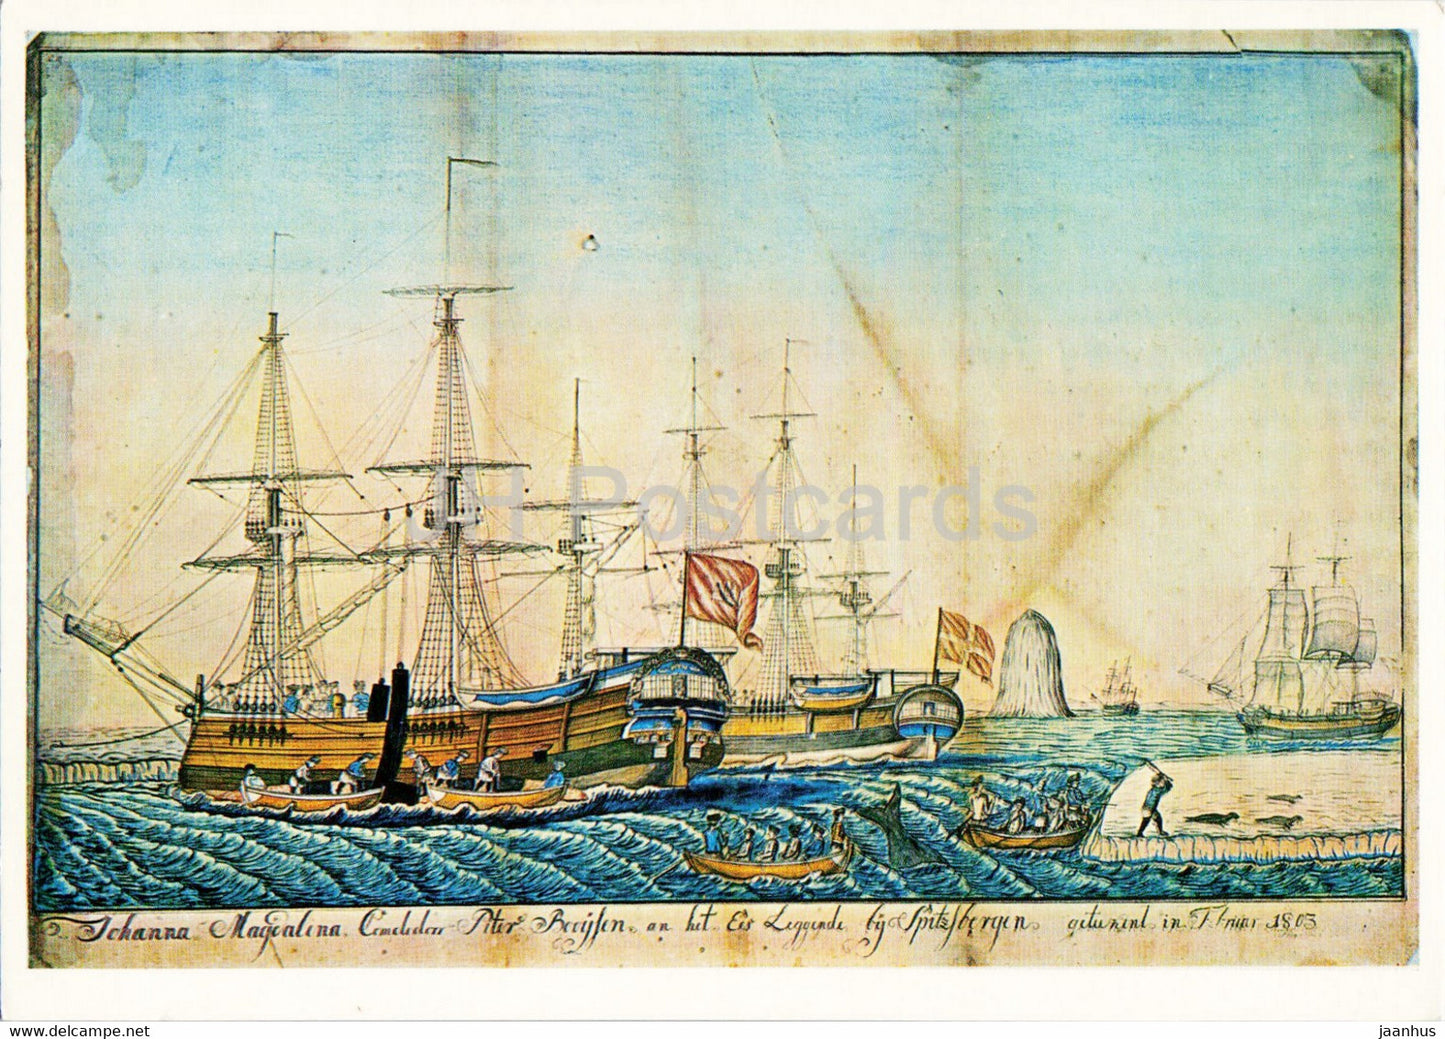 Whalers hunting whales and seals off Spitzberg 1803 - painting by Hinrich Butt - ship - Danish art - Denmark - unused - JH Postcards